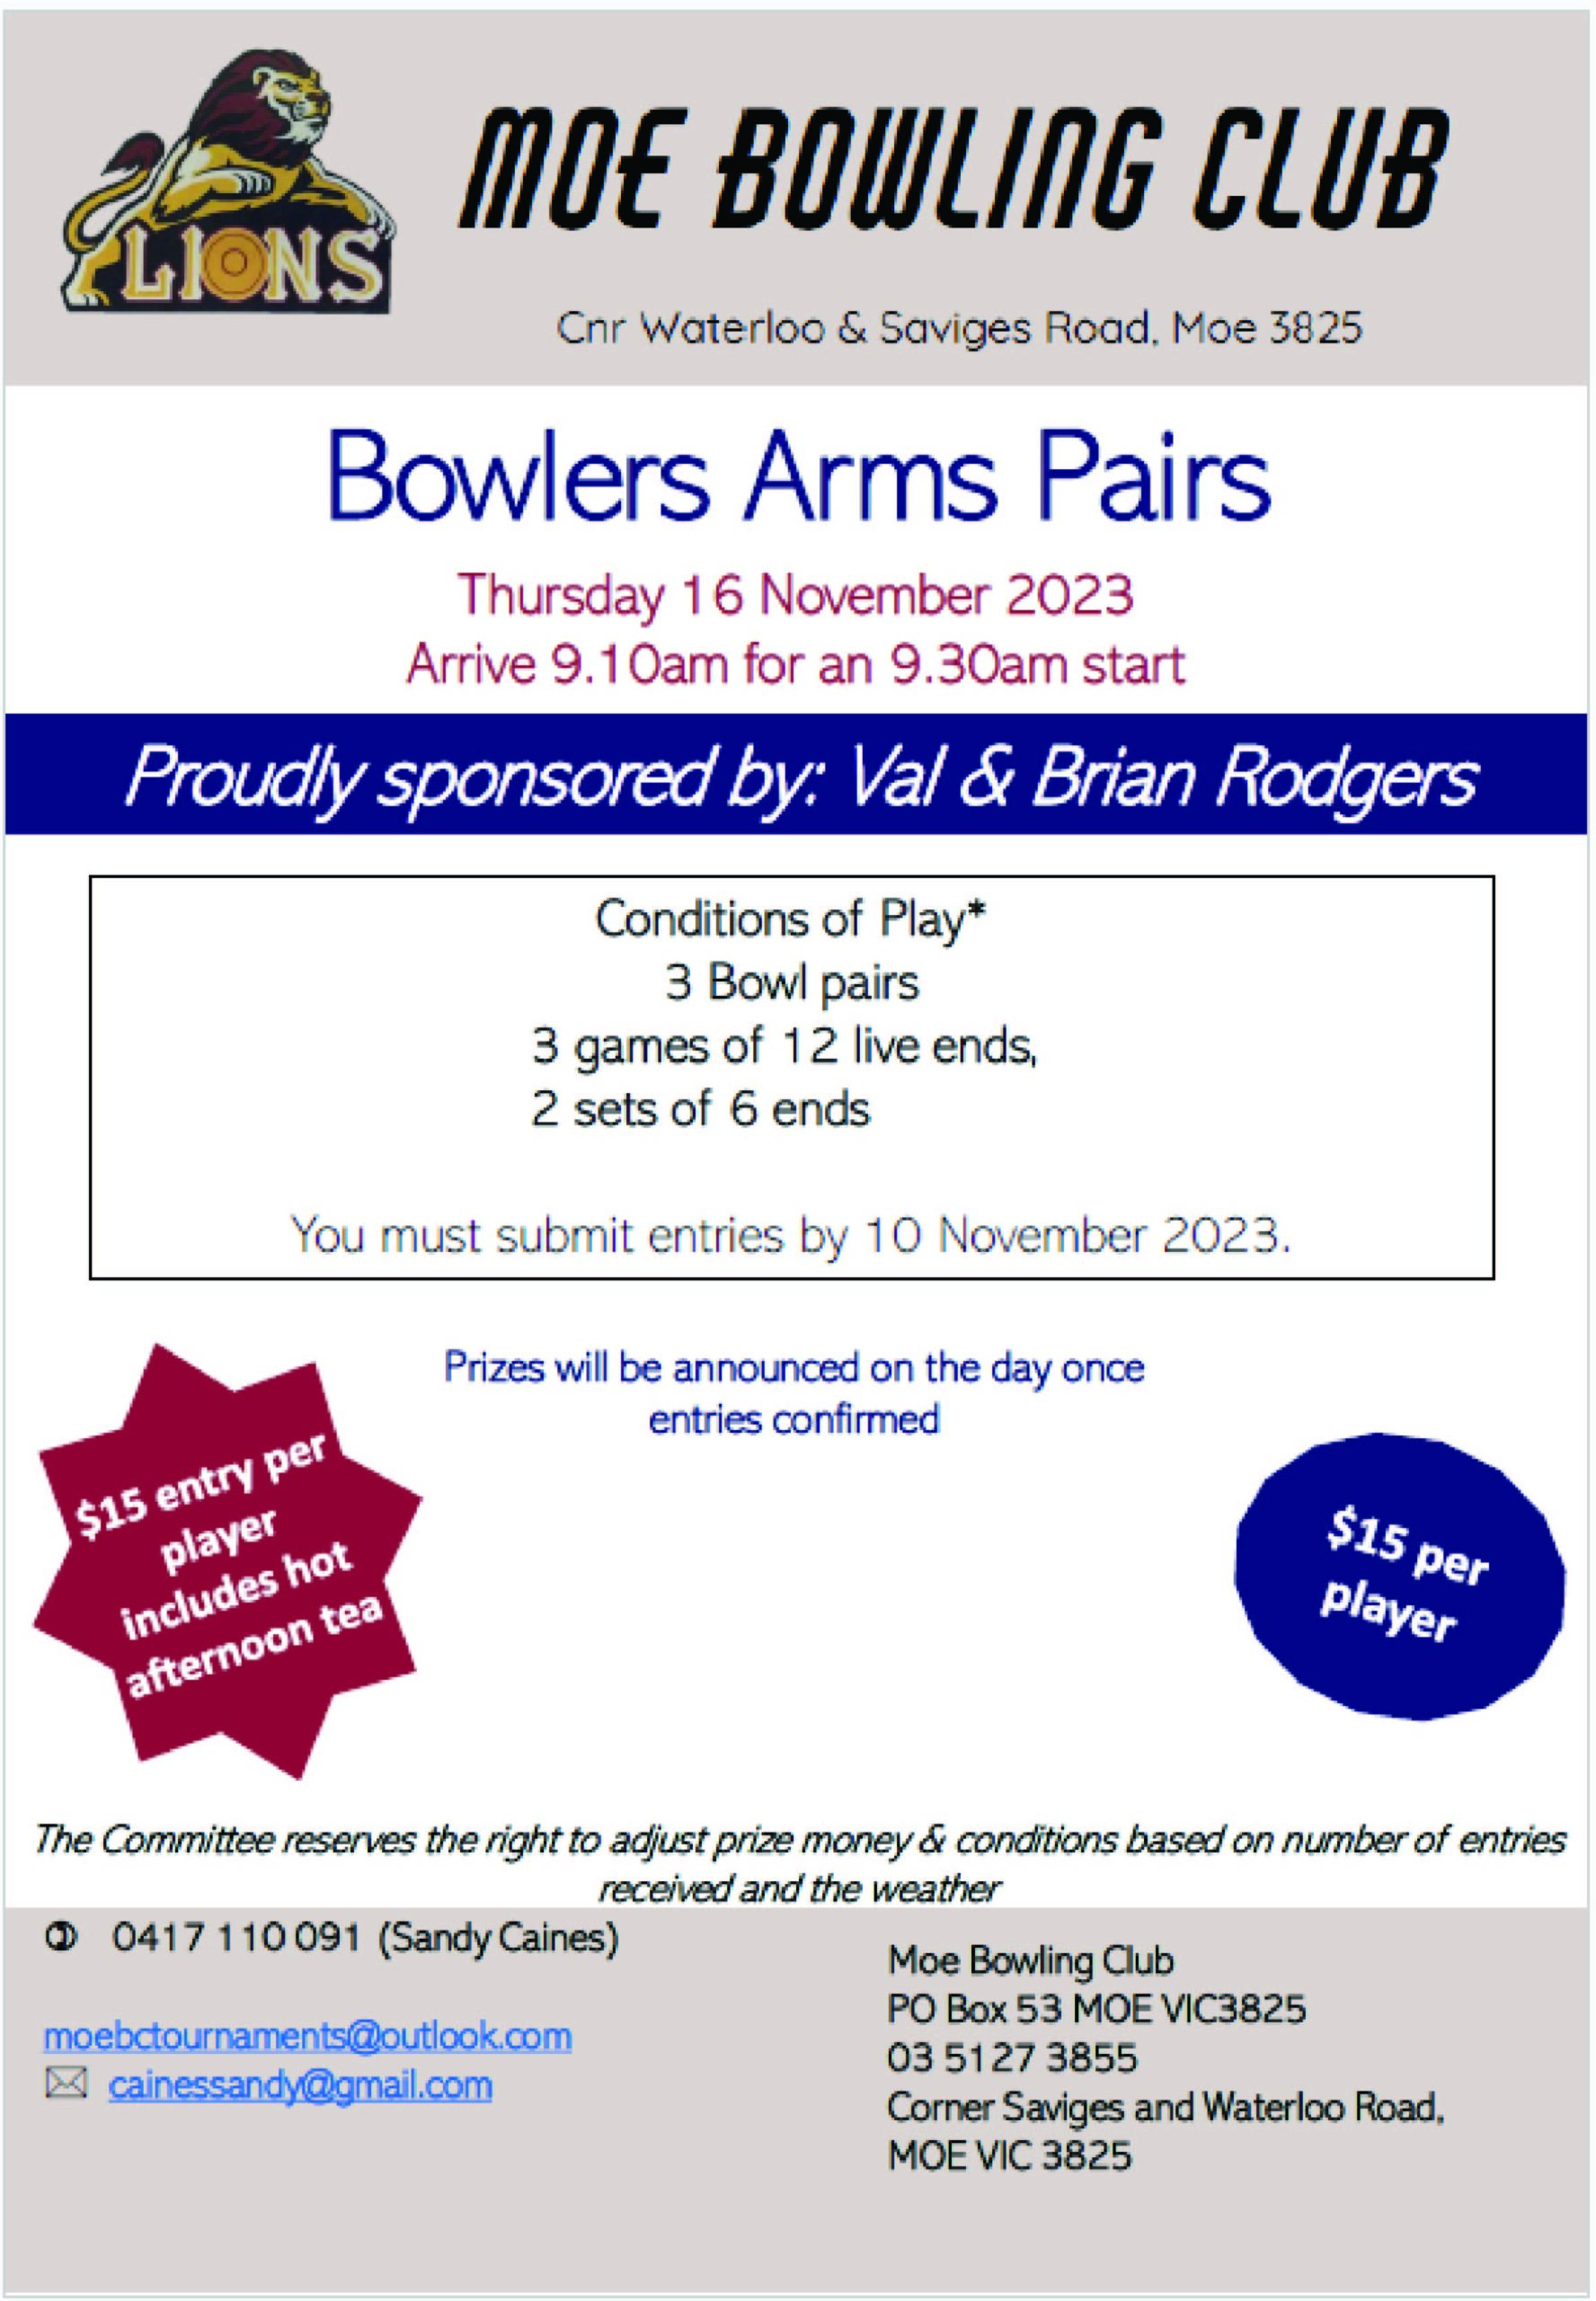 Moe Bowling Club Bowlers Arm Pairs November 16th contact: Sandy on 0417 110 091